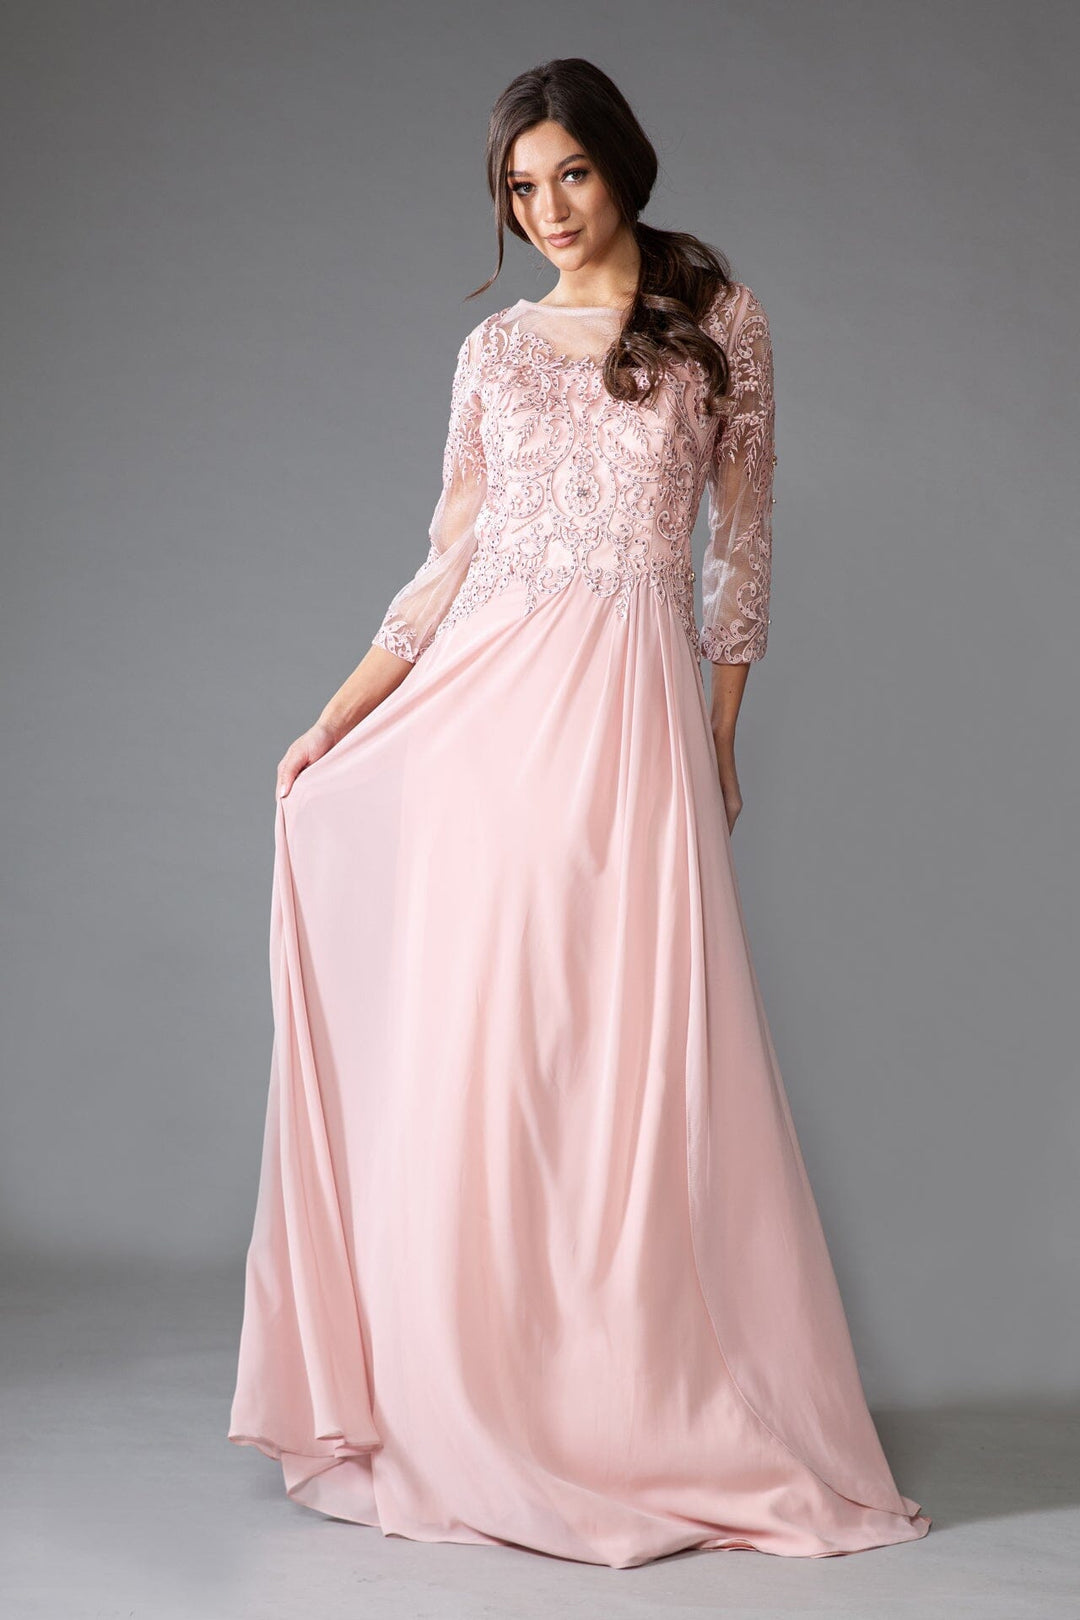 Embroidered 3/4 Sleeve Chiffon Gown by Amelia Couture 7043